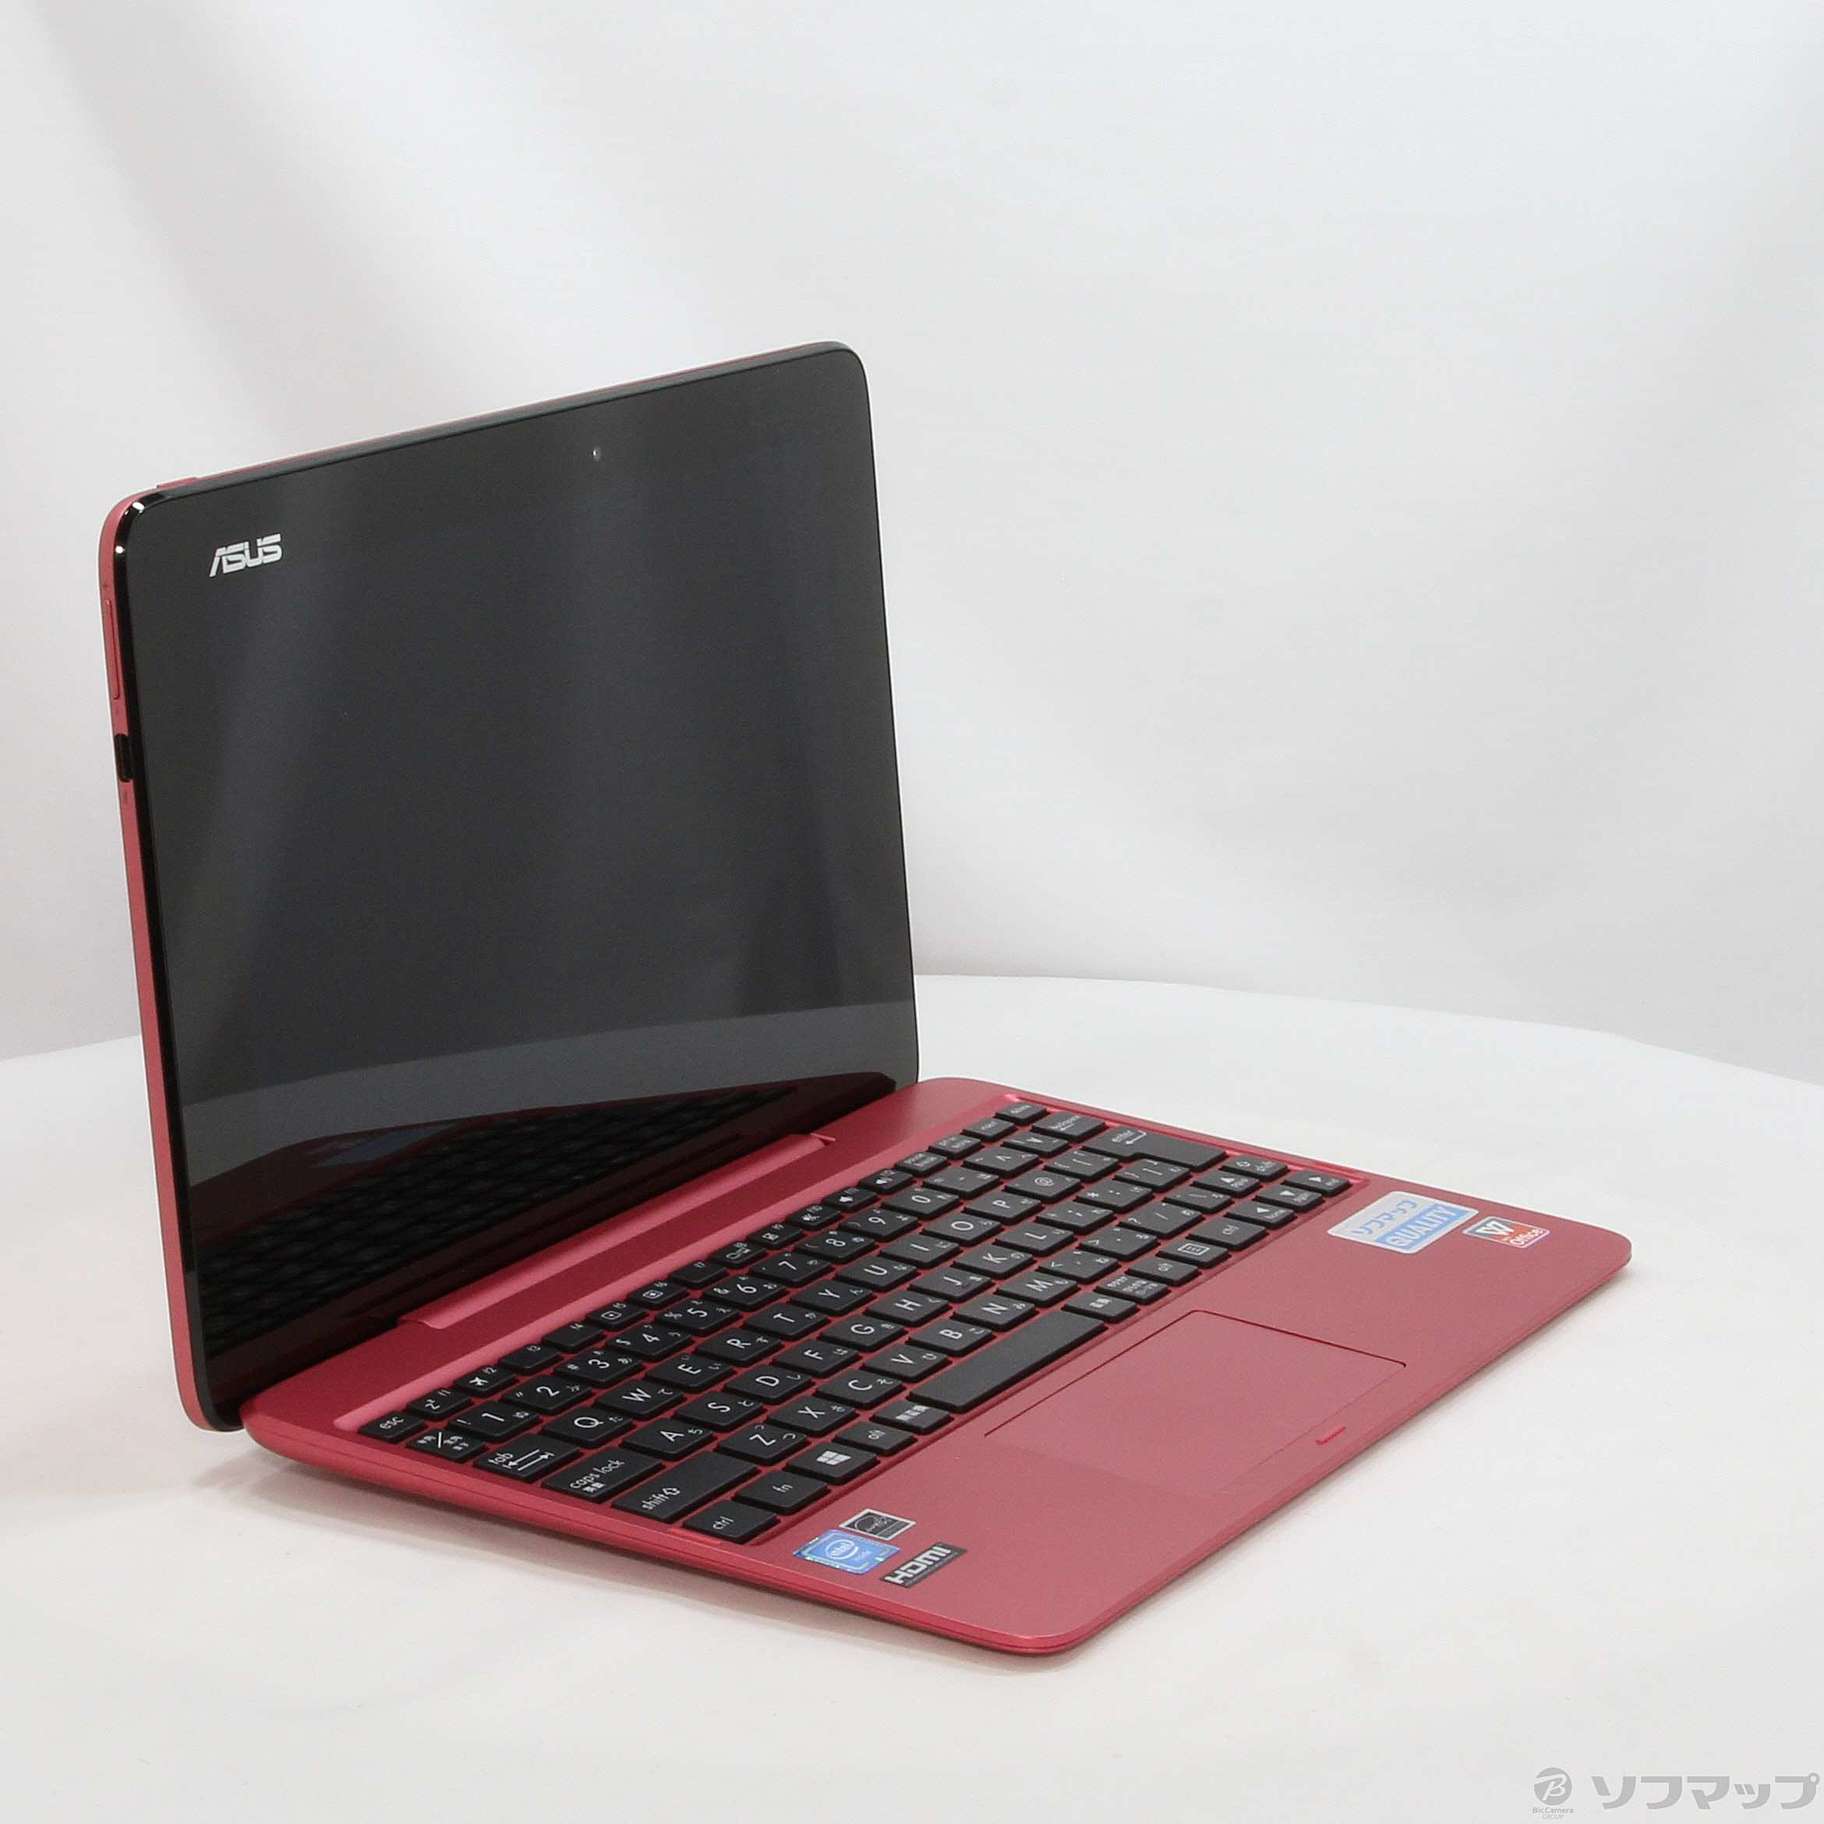 ASUS TransBook T100HA-ROUGE [ルージュレッド]